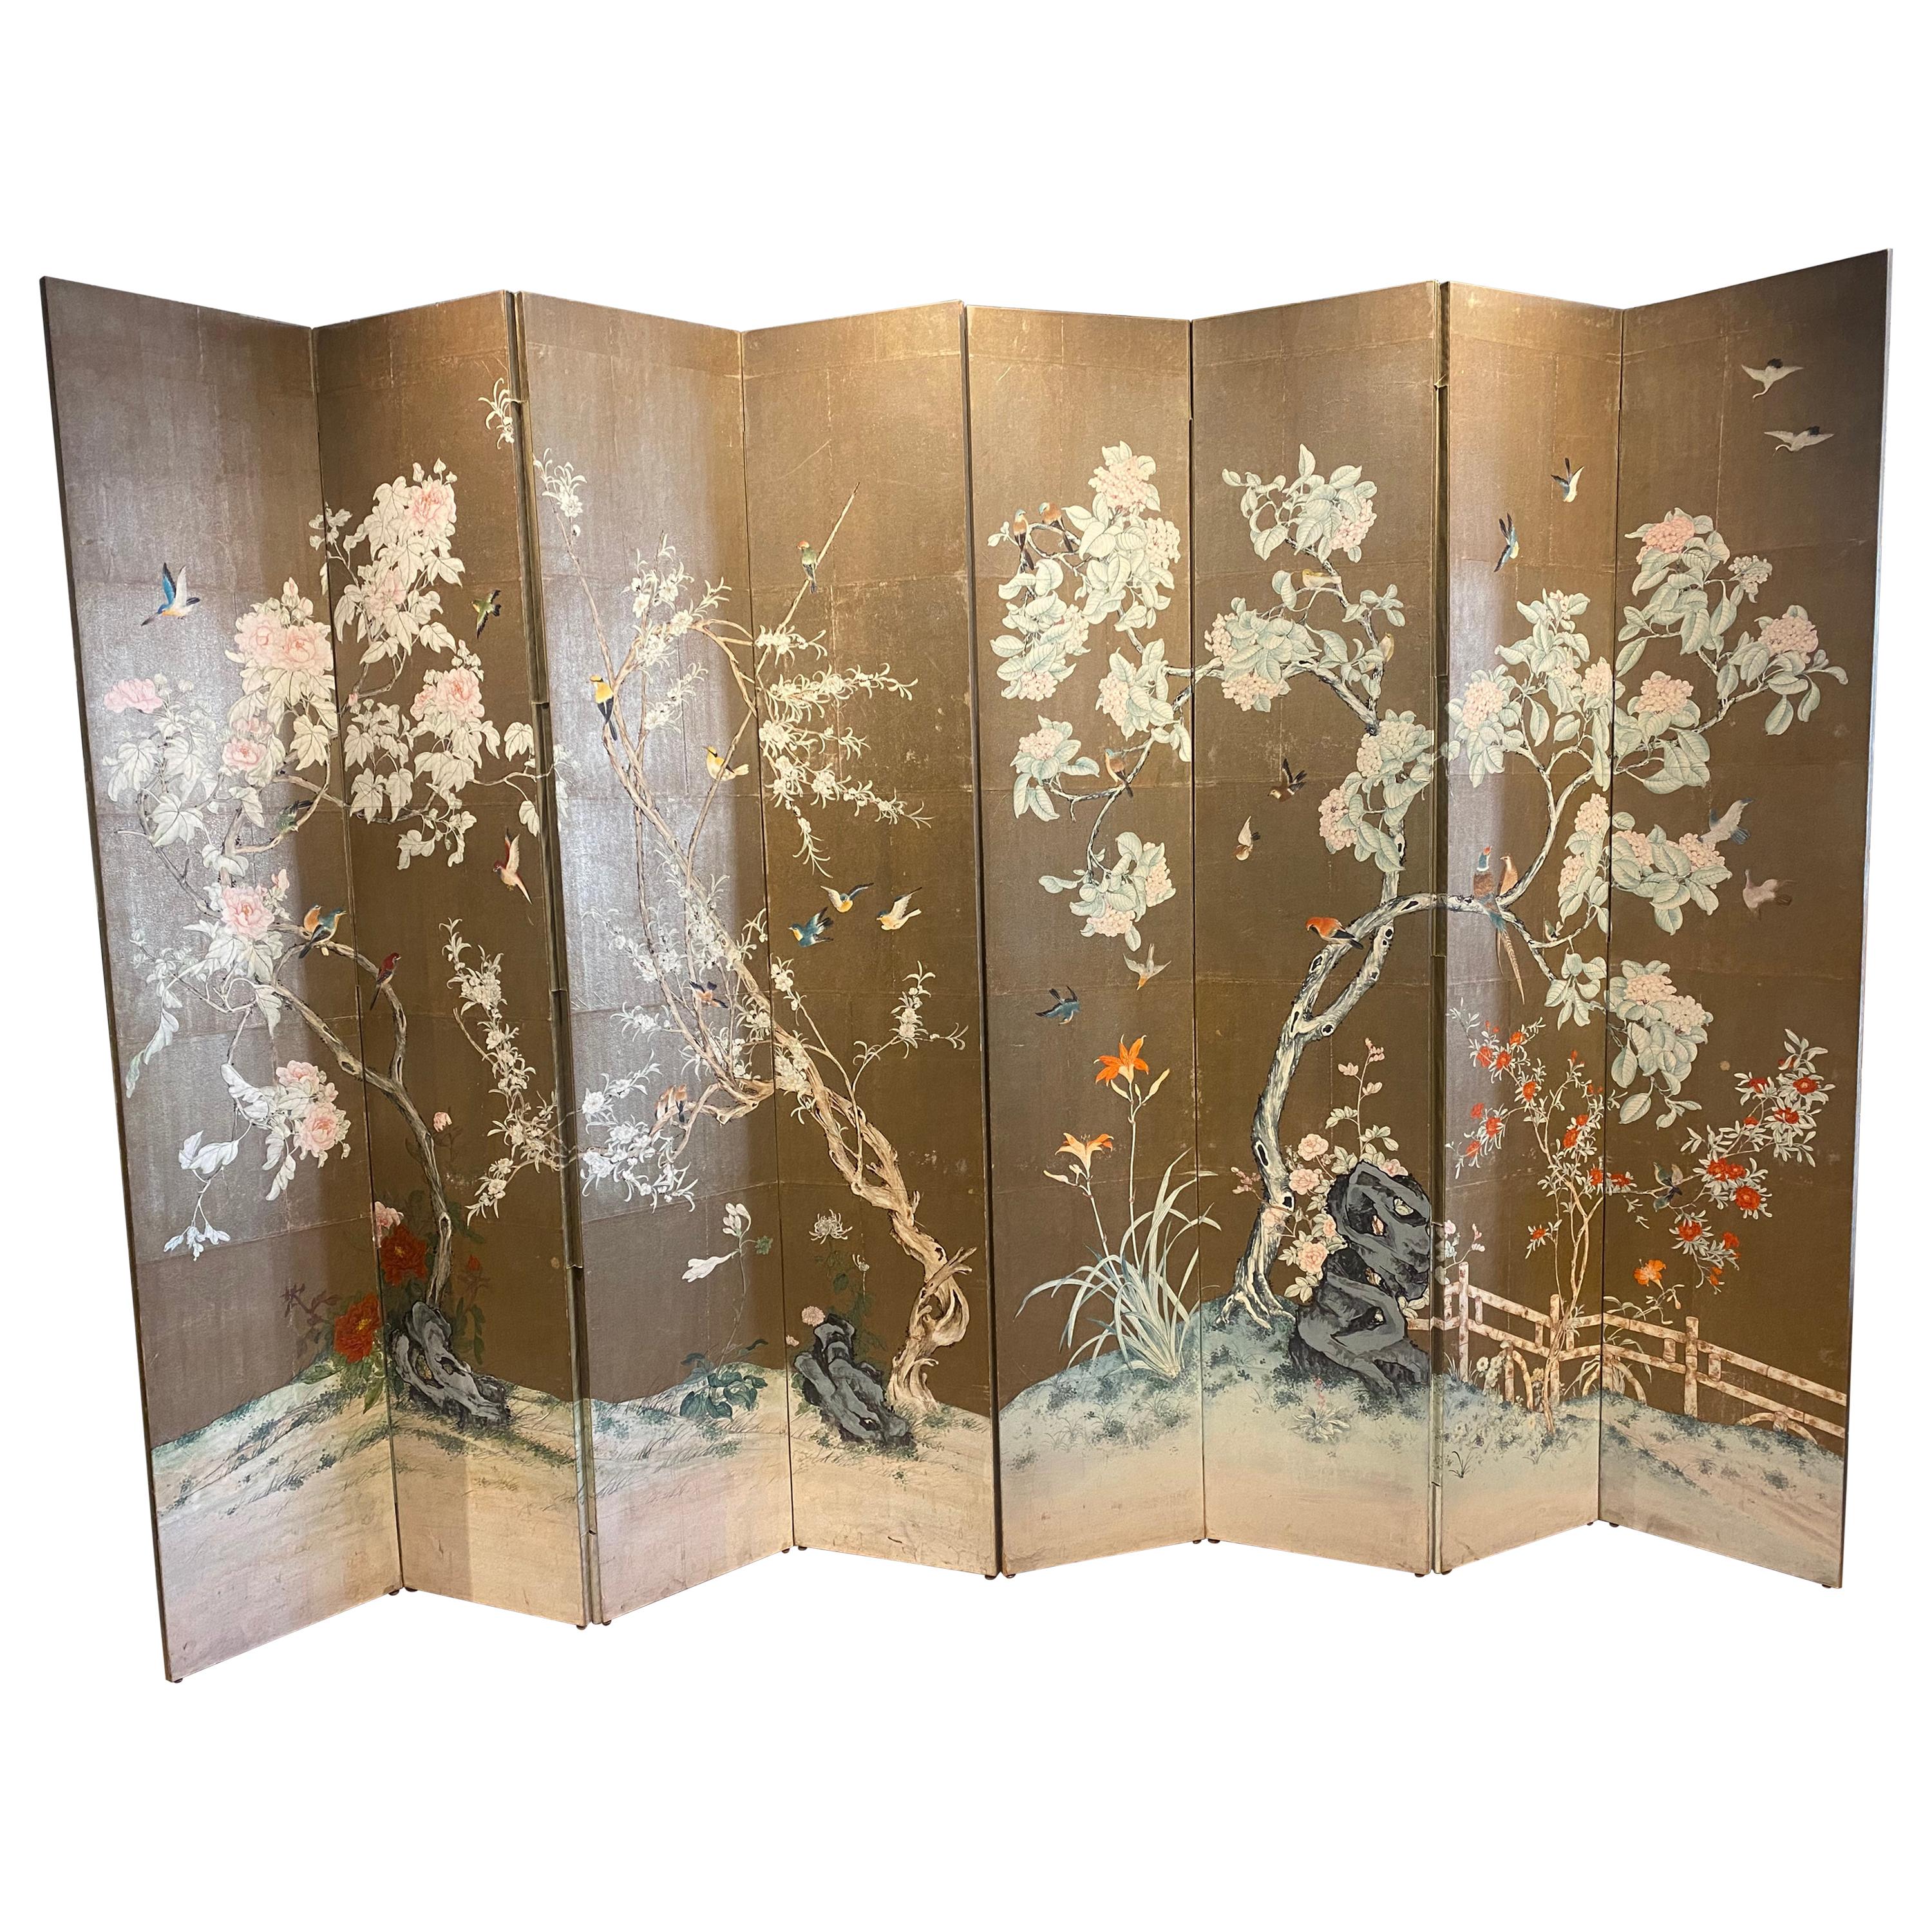 Incredible Midcentury 8-Panel Hand Painted Gold Leaf Screen